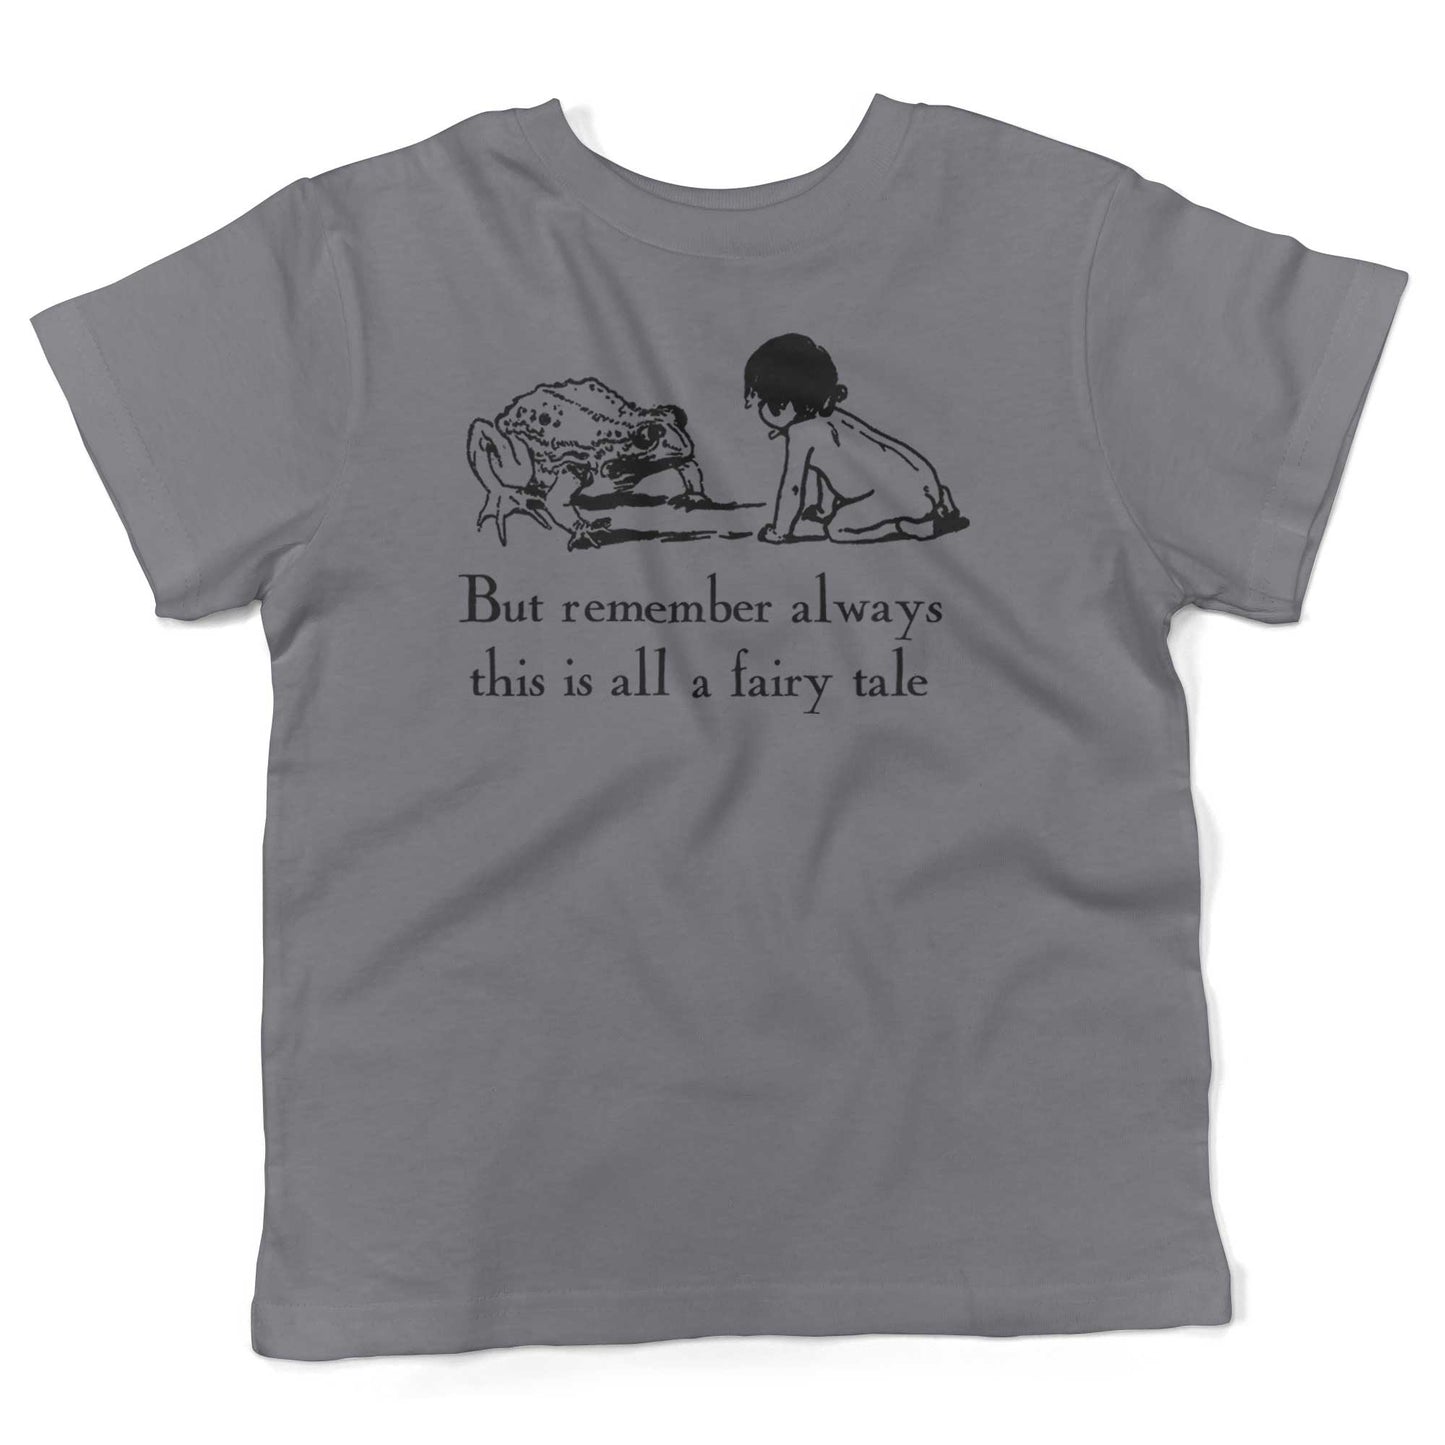 But remember always this is all a fairy tale Toddler Shirt-Slate-2T